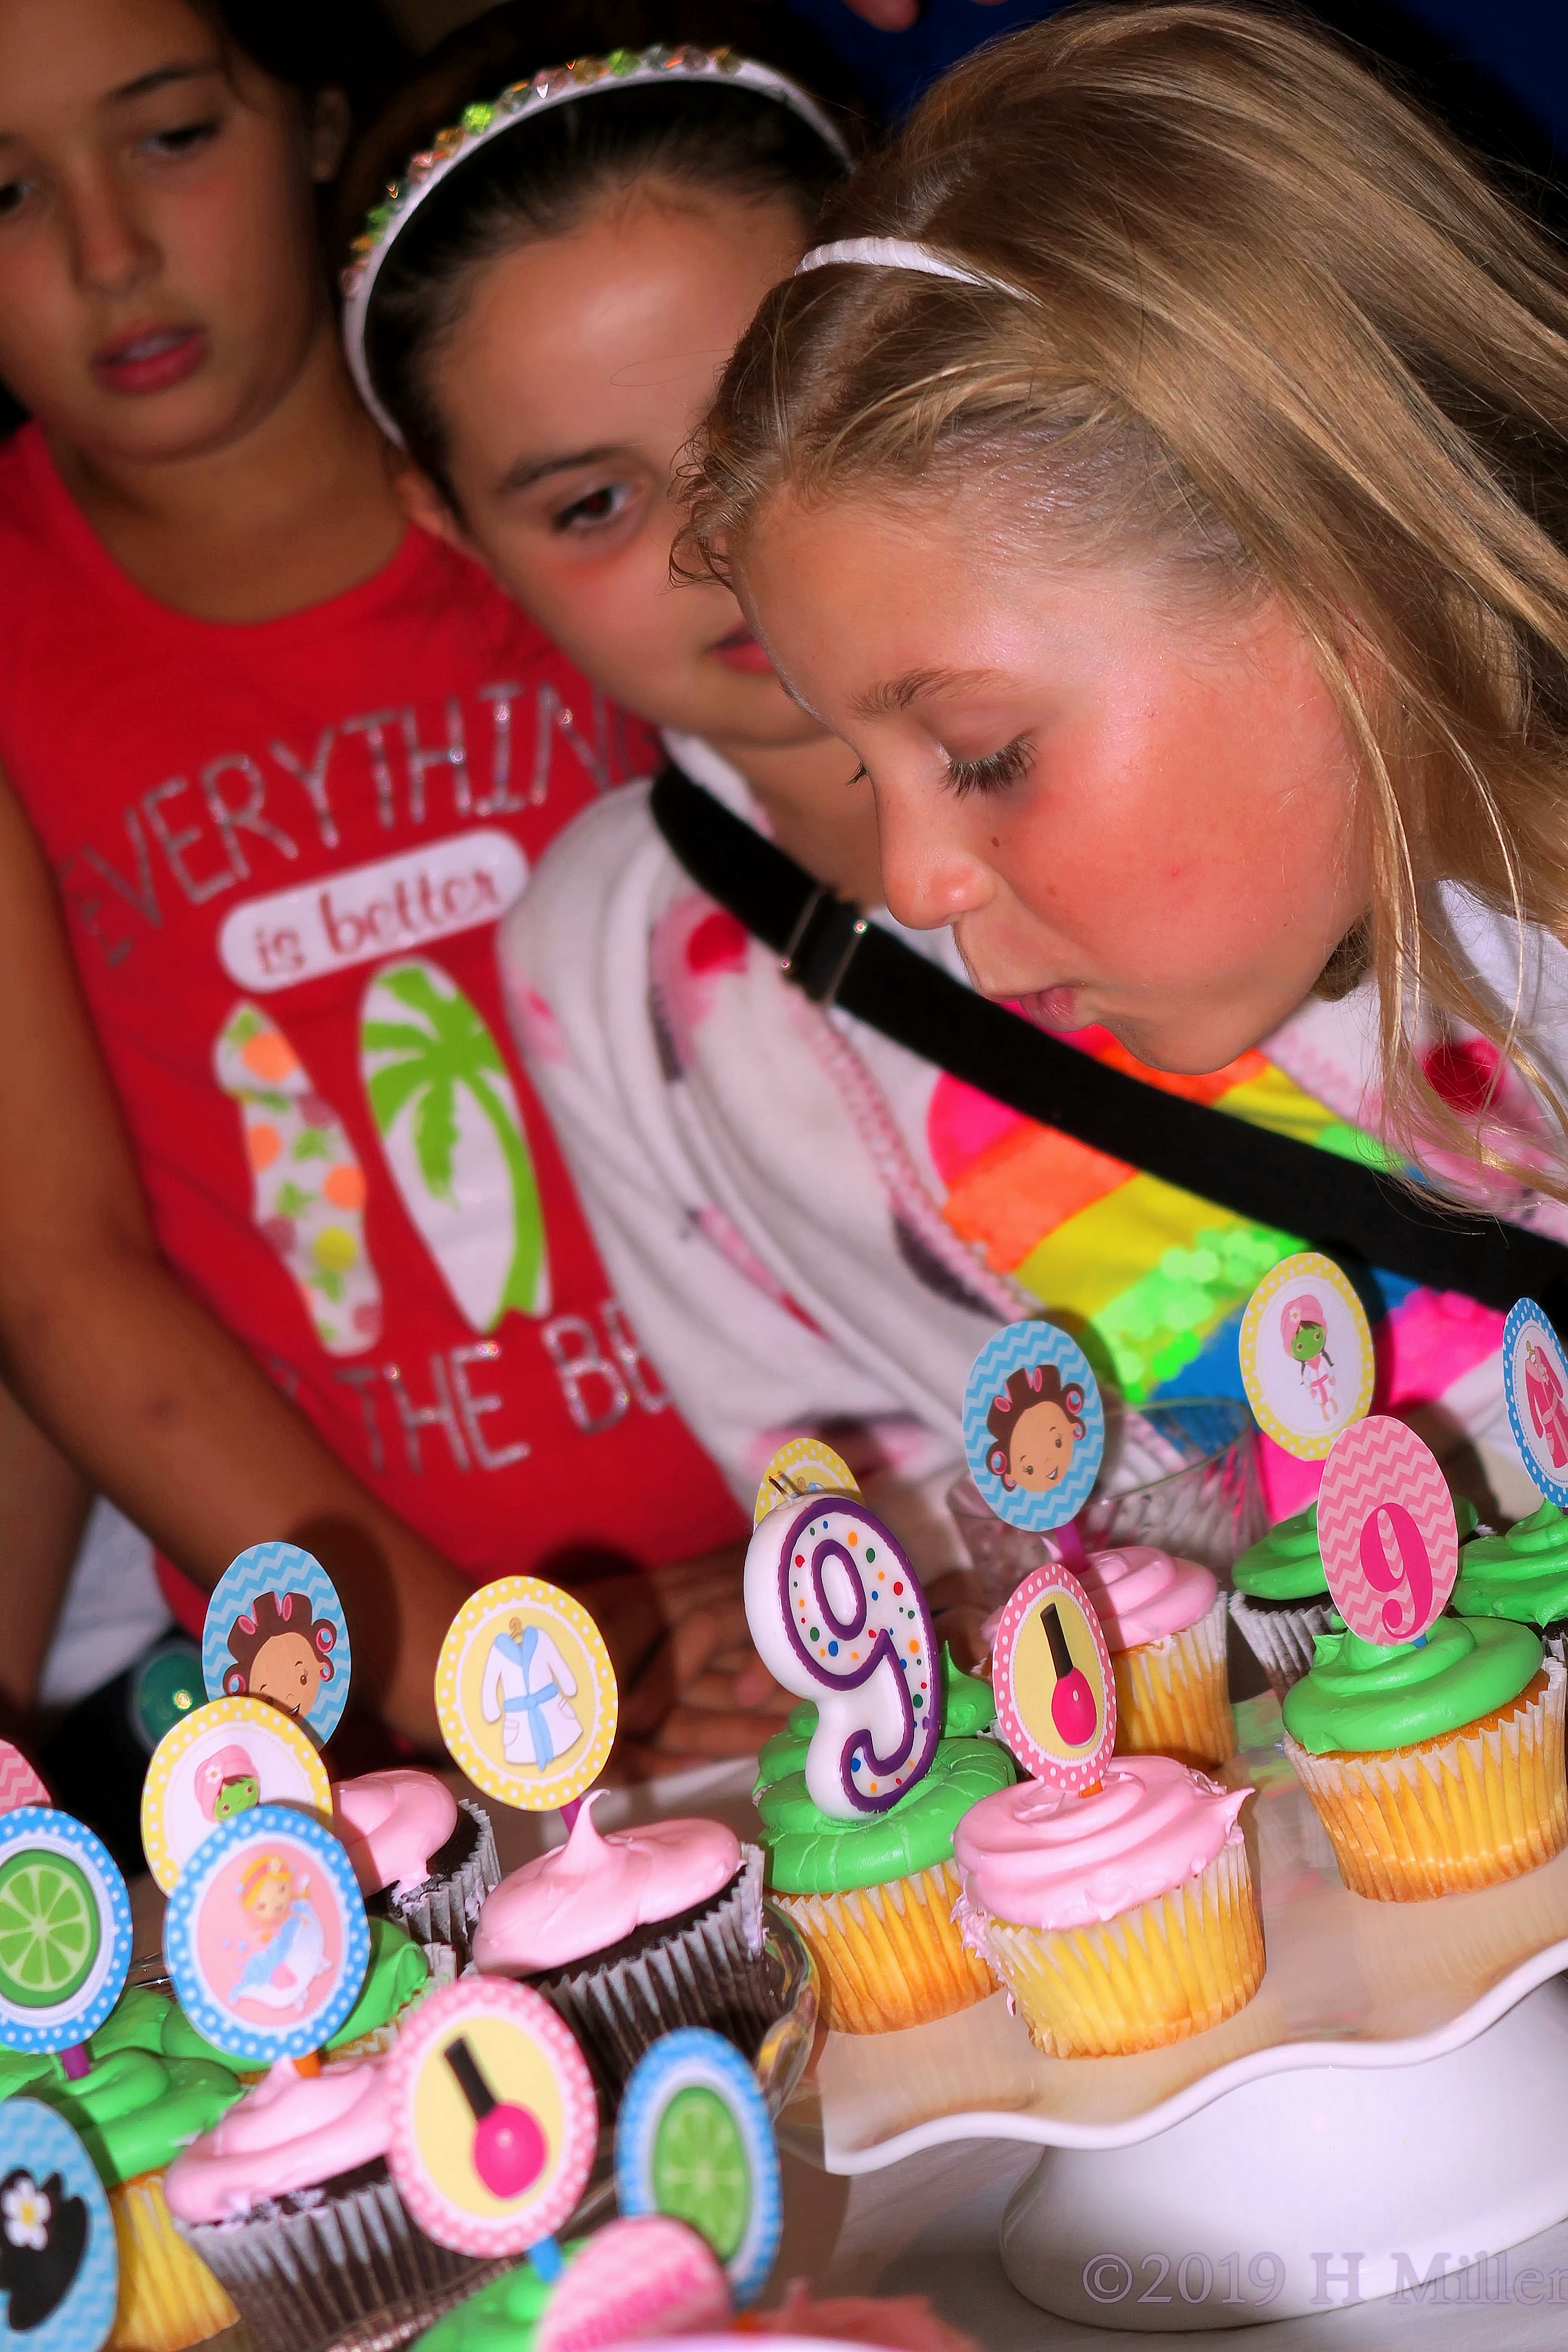 Blissful Blessings! Blowing Out Candles On Cupcakes At The Kids Spa Party! 4